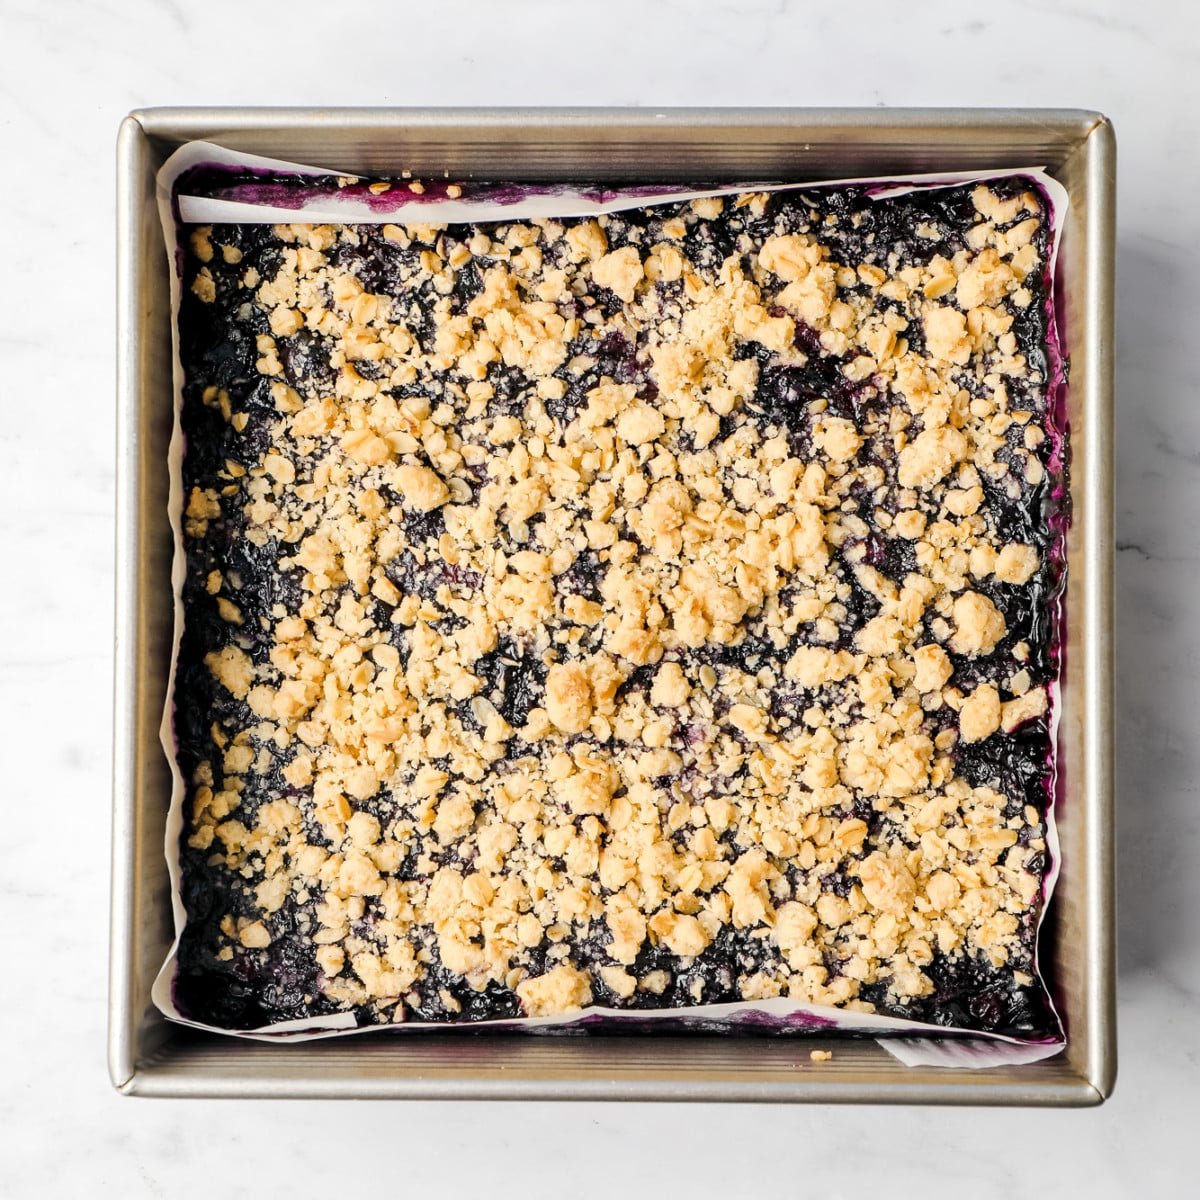 square pan with crumb topping over blueberry mixture, cooked